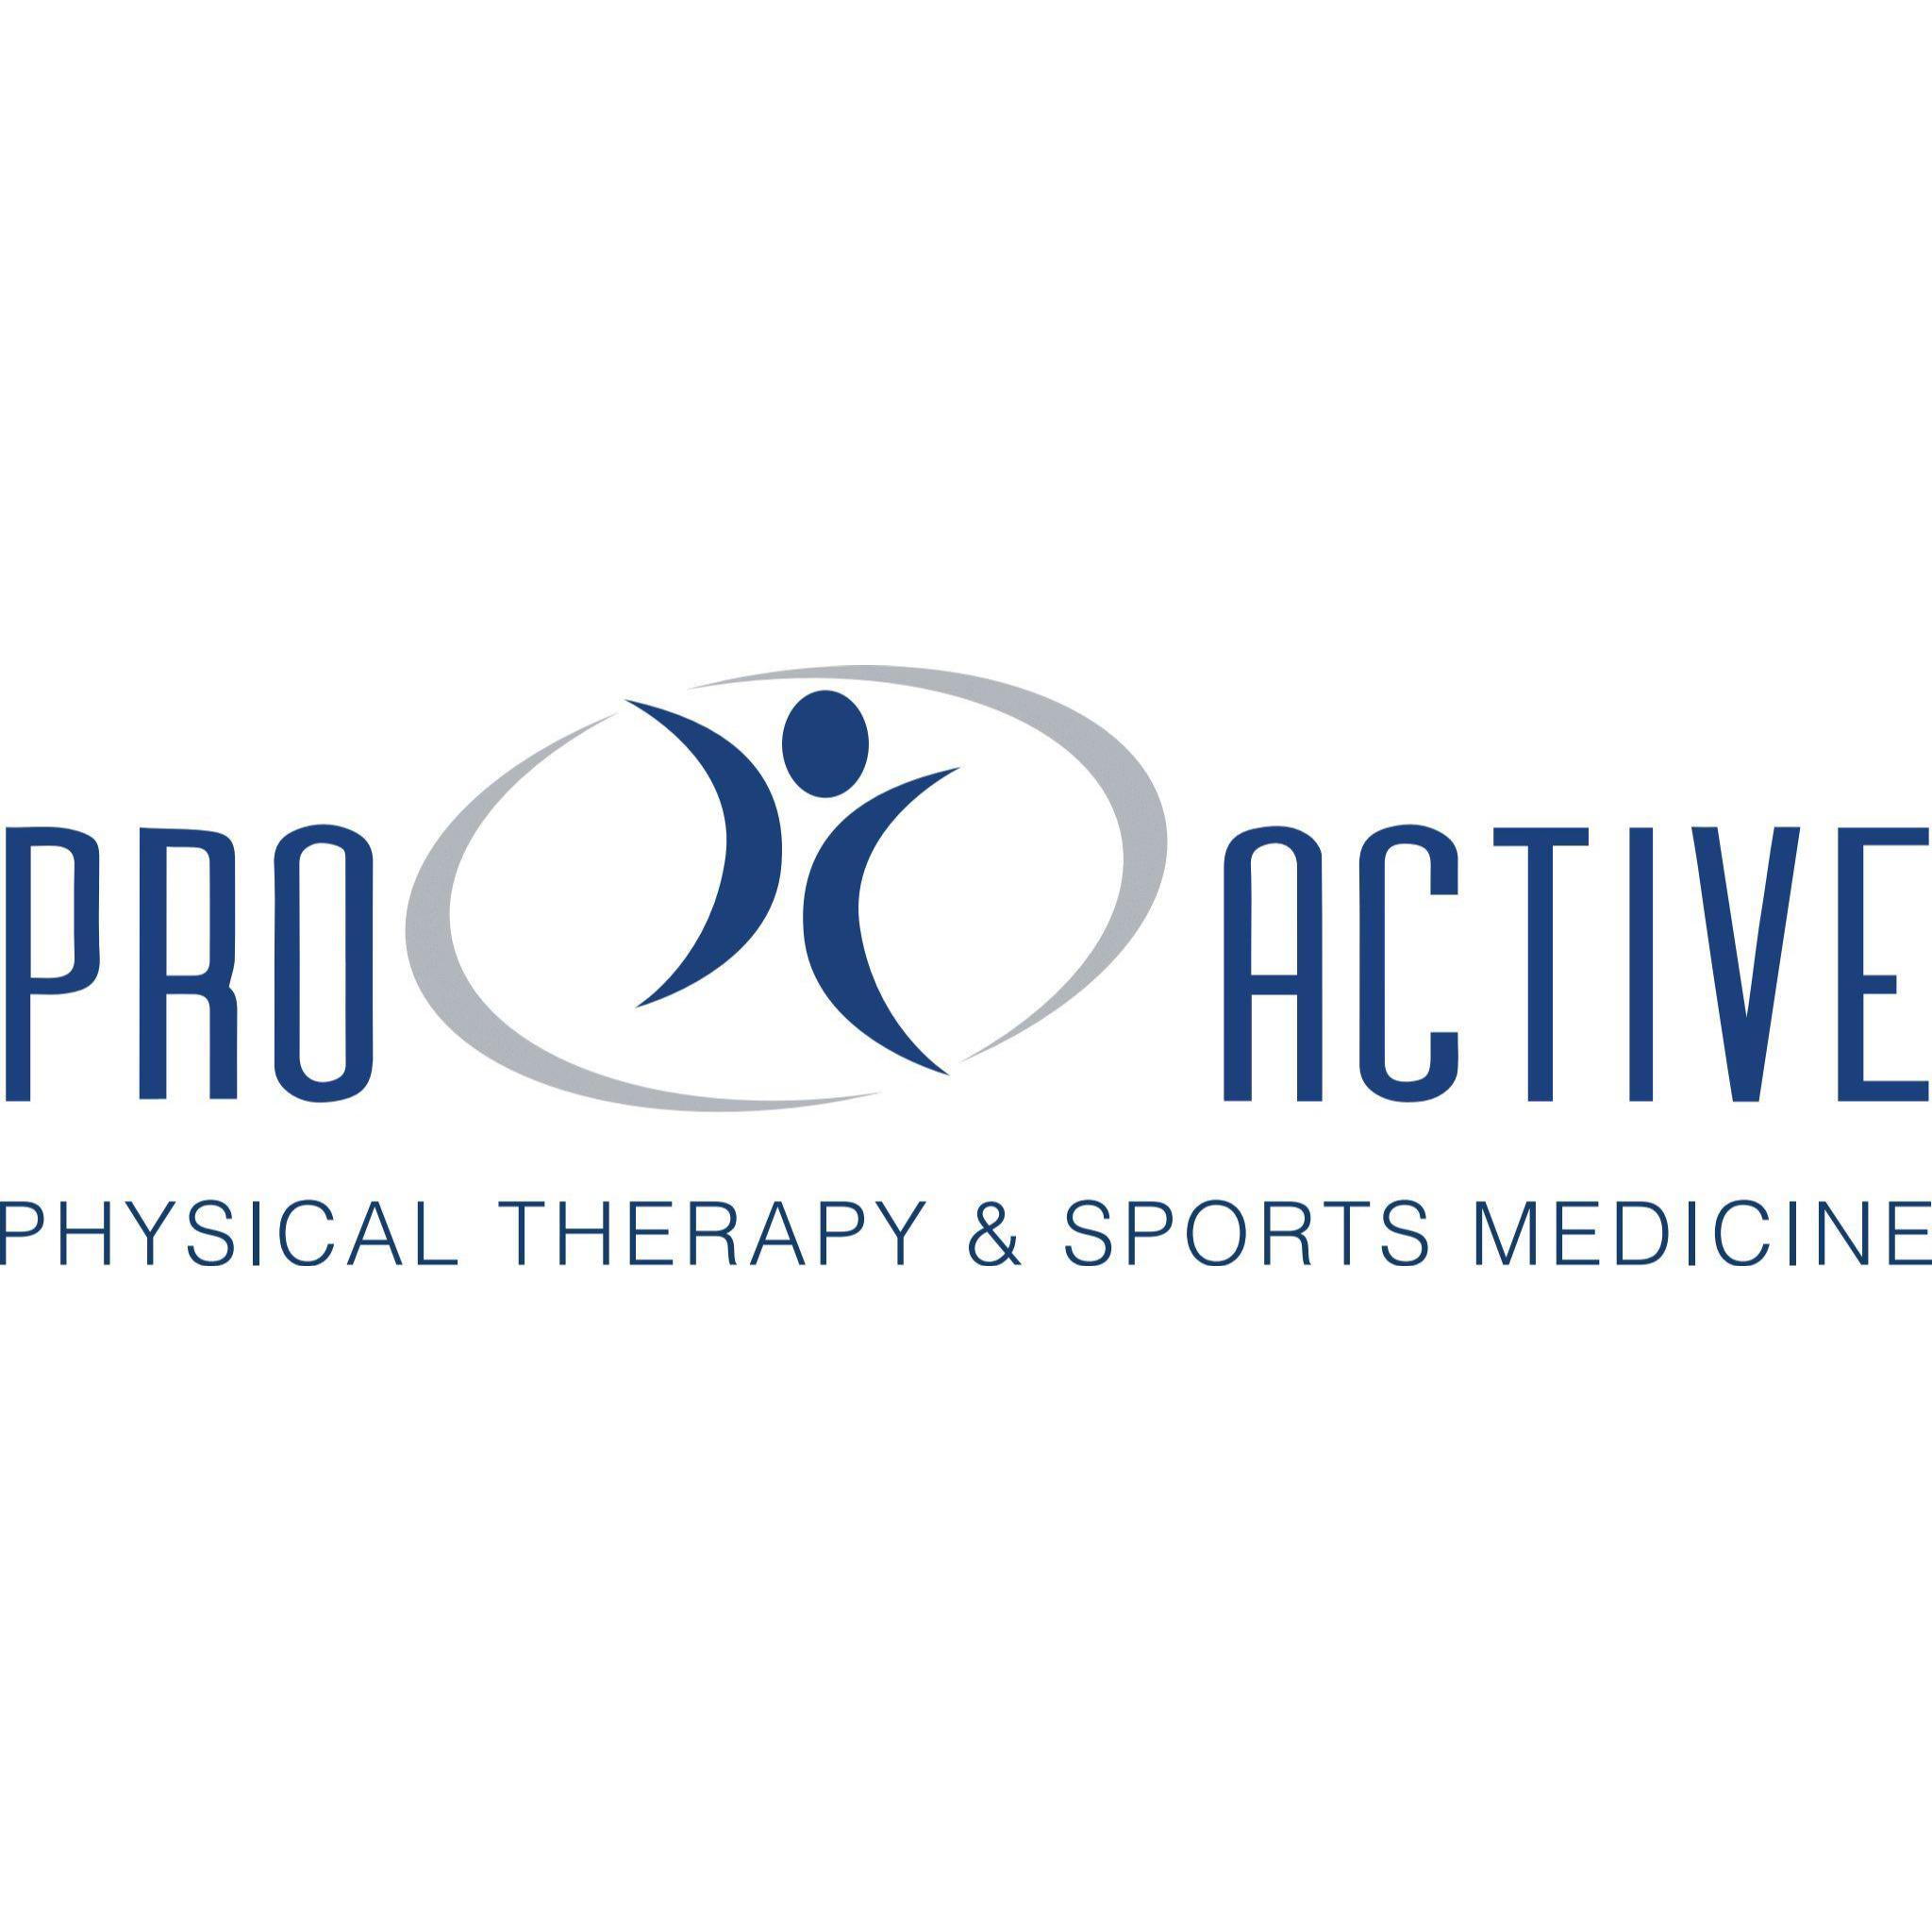 Pro Active Physical Therapy and Sports Medicine - Castle Rock - Castle Rock, CO 80109 - (303)688-3914 | ShowMeLocal.com